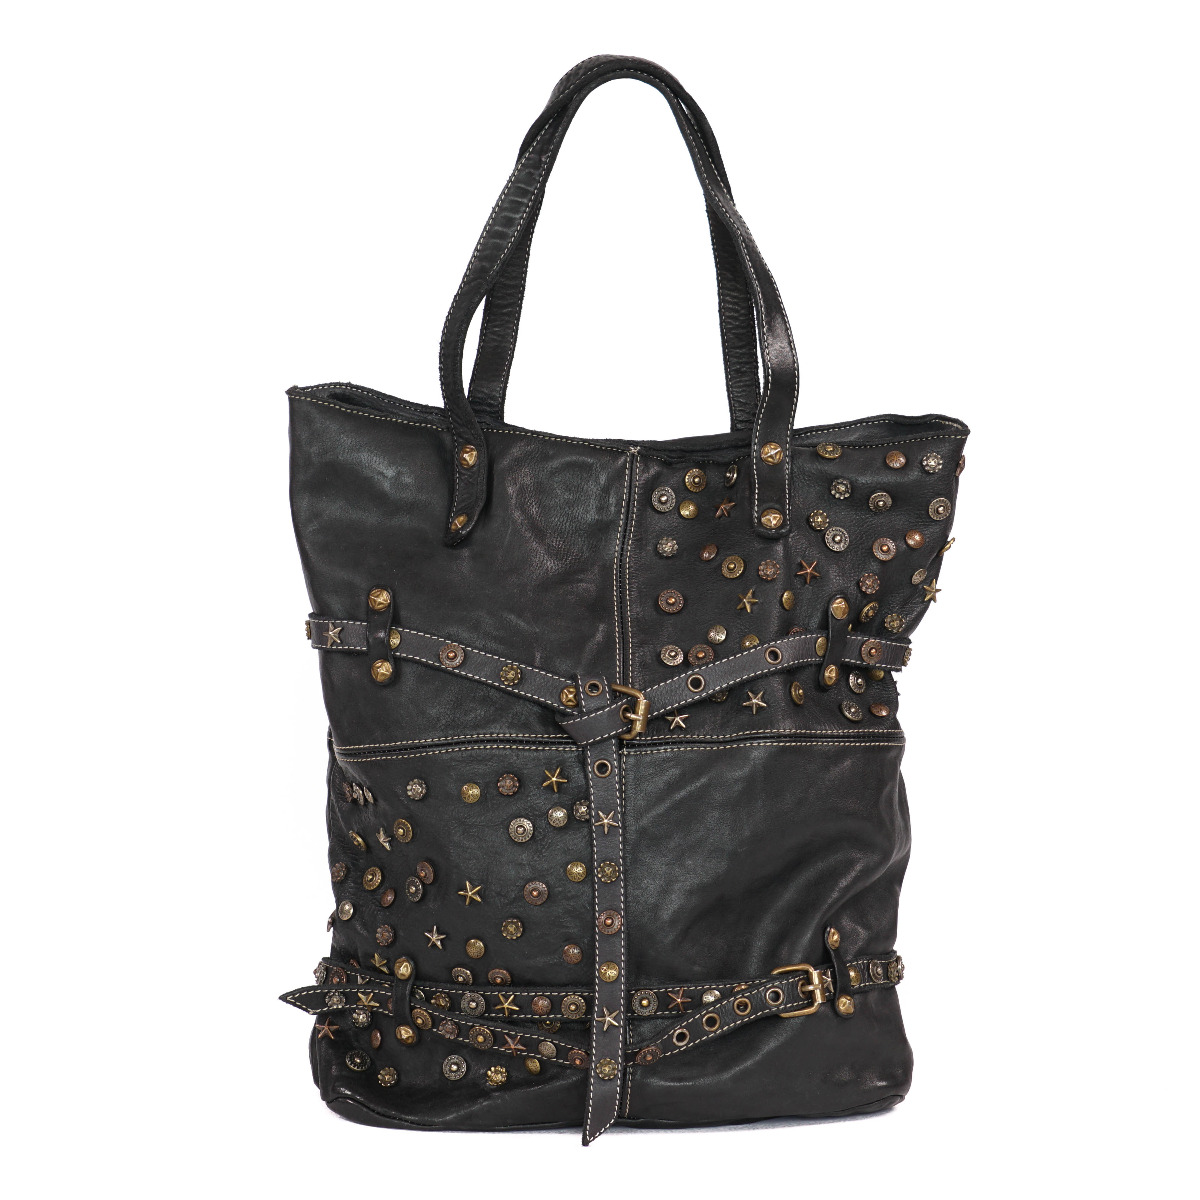 Black tote bag with studs - large